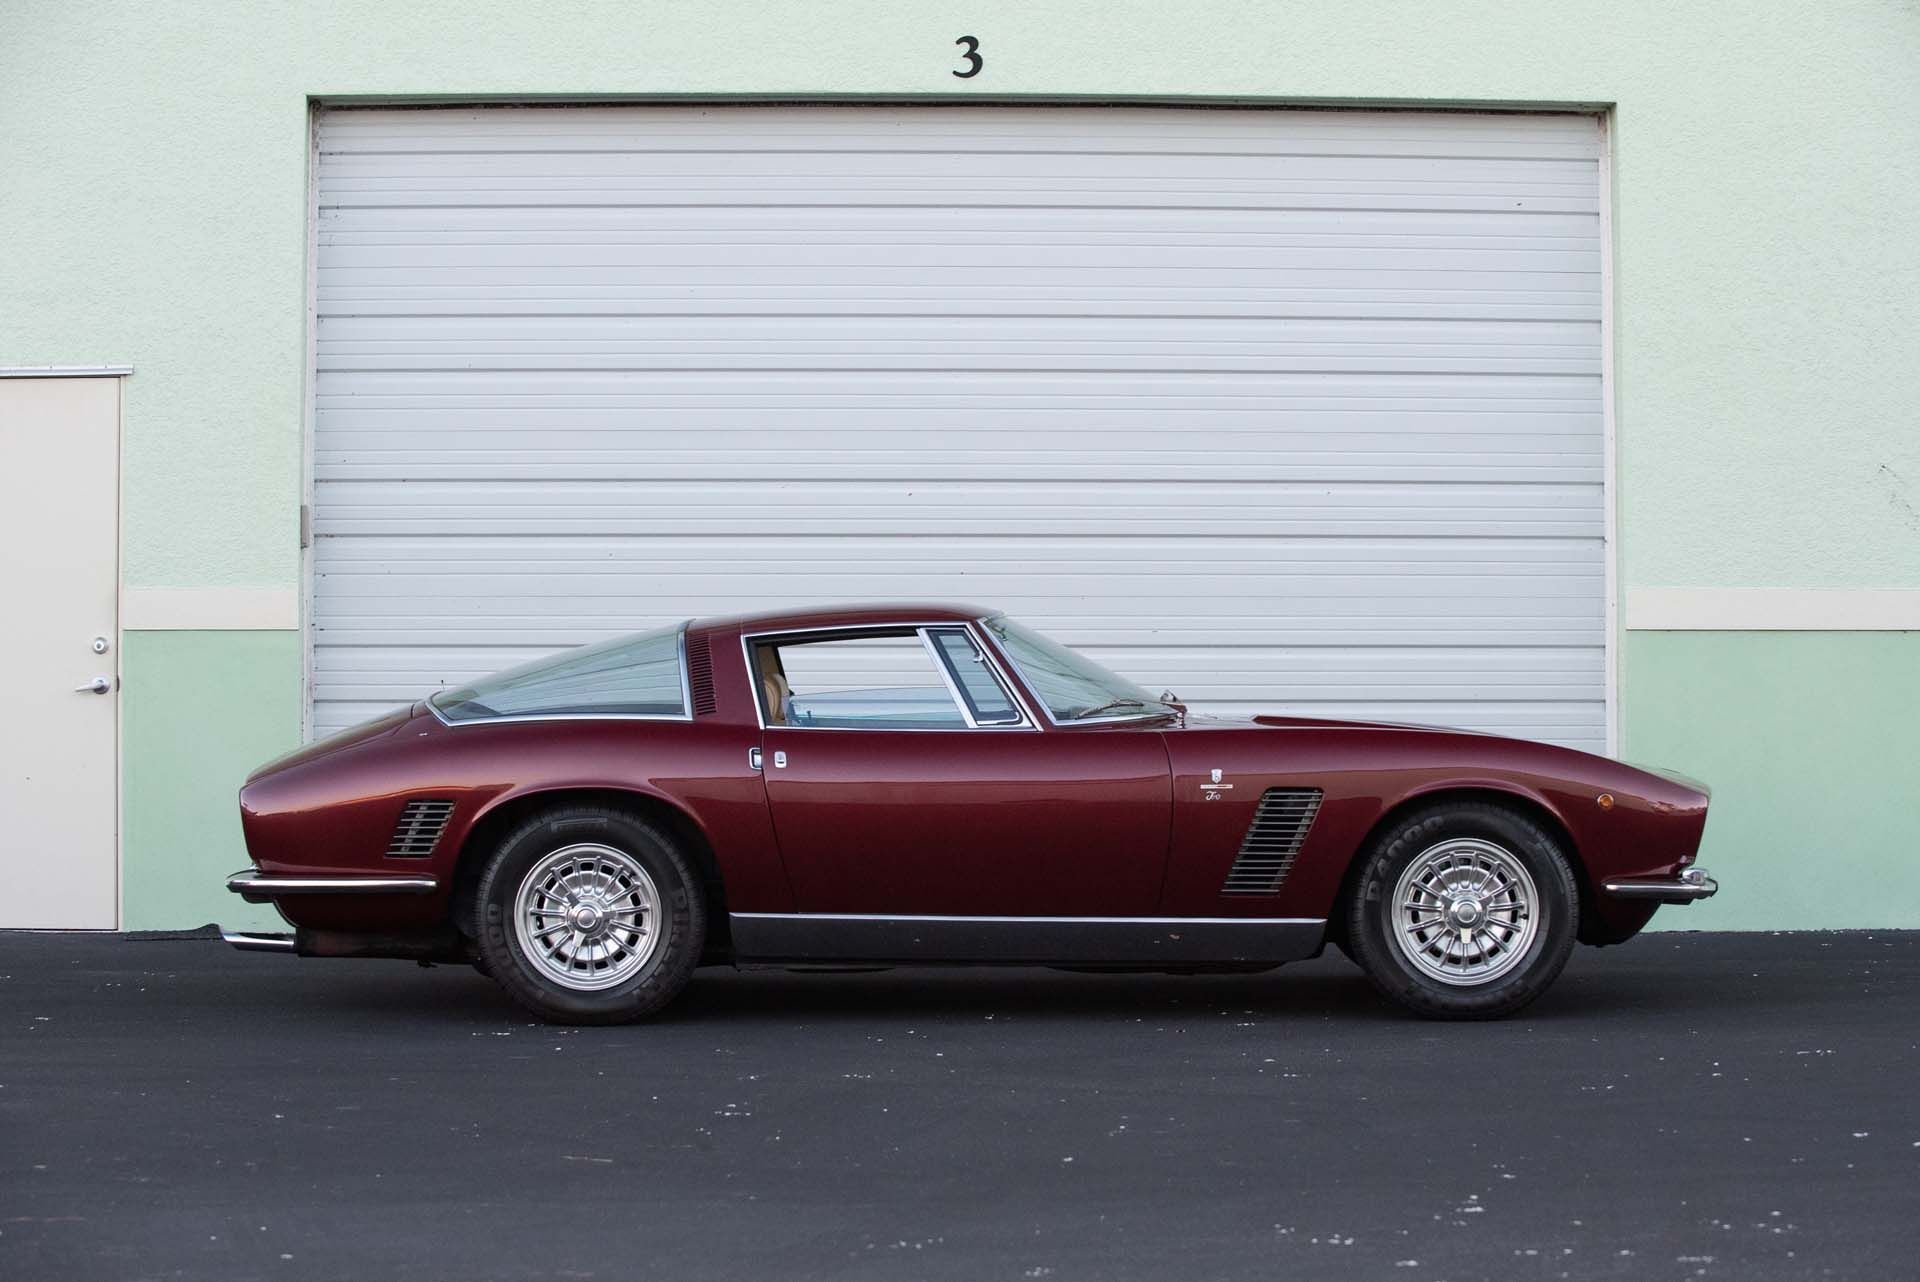 For Sale 1967 Iso Grifo GL Series I